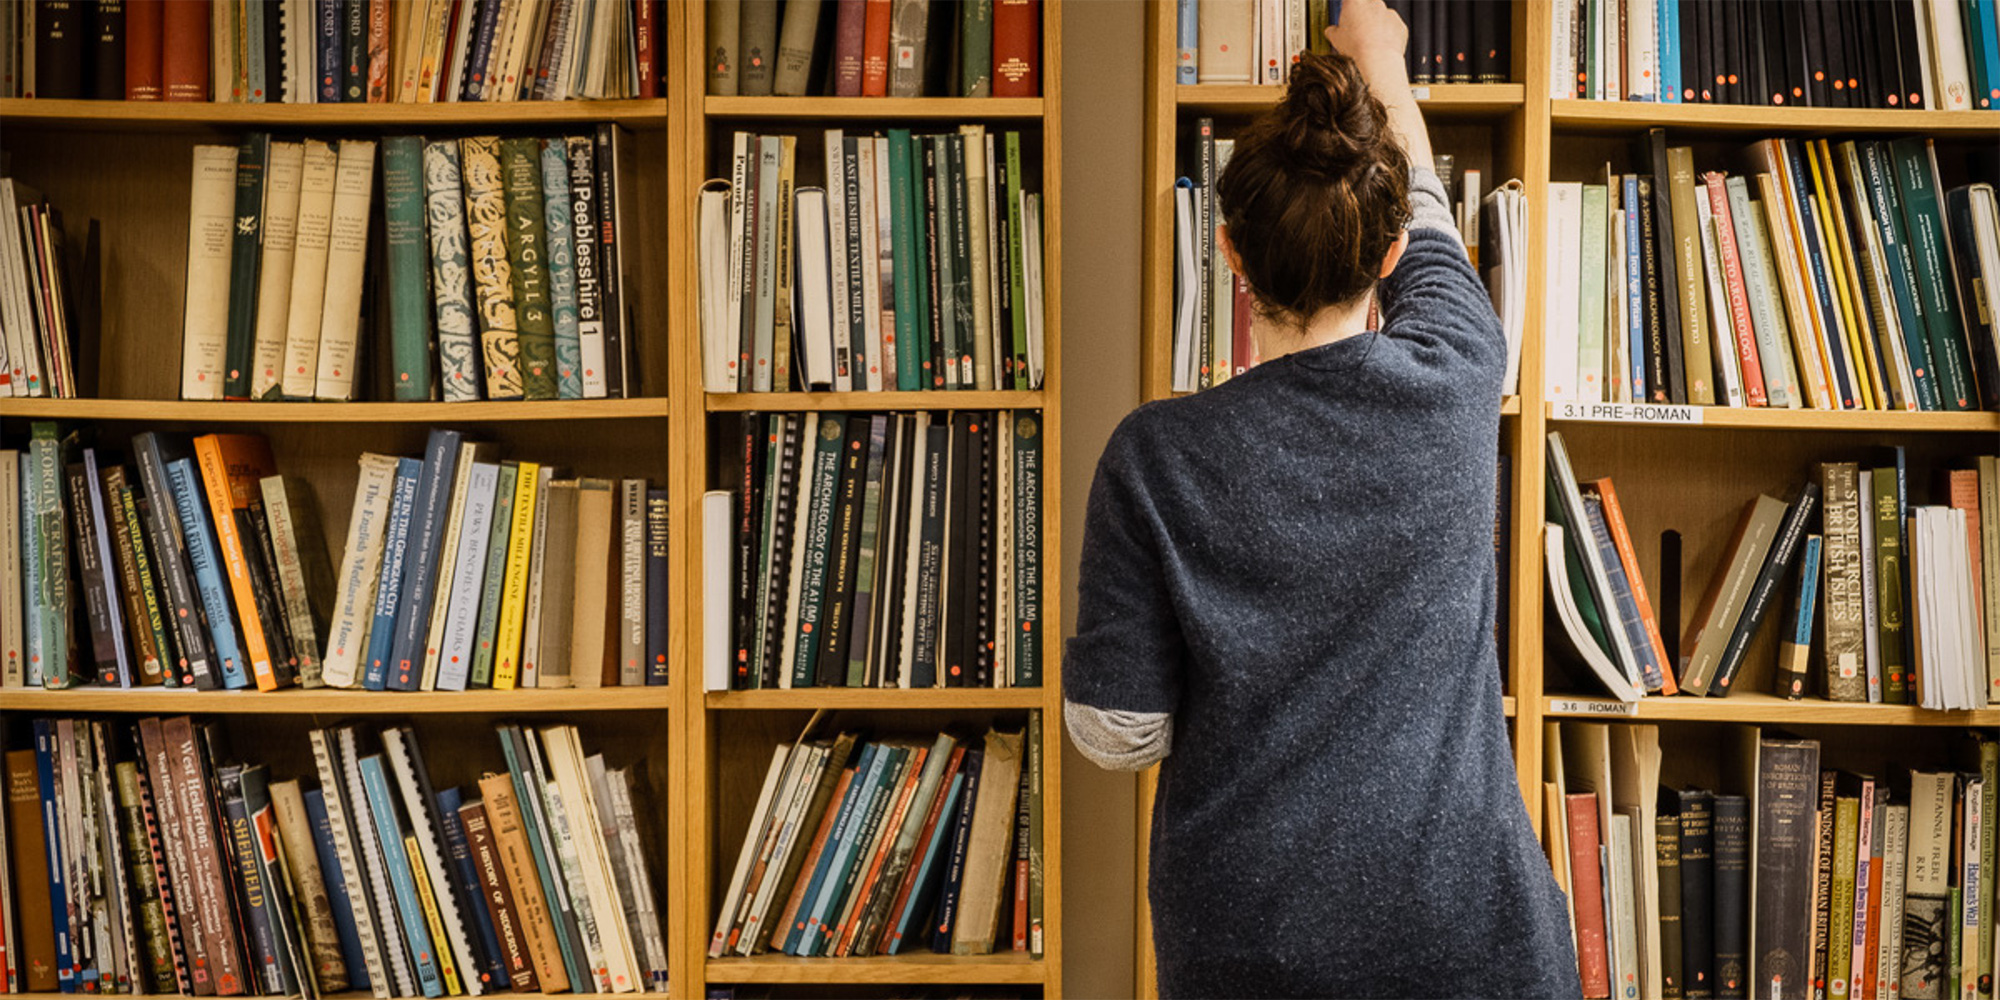 A librarian stacks books on a shelf.